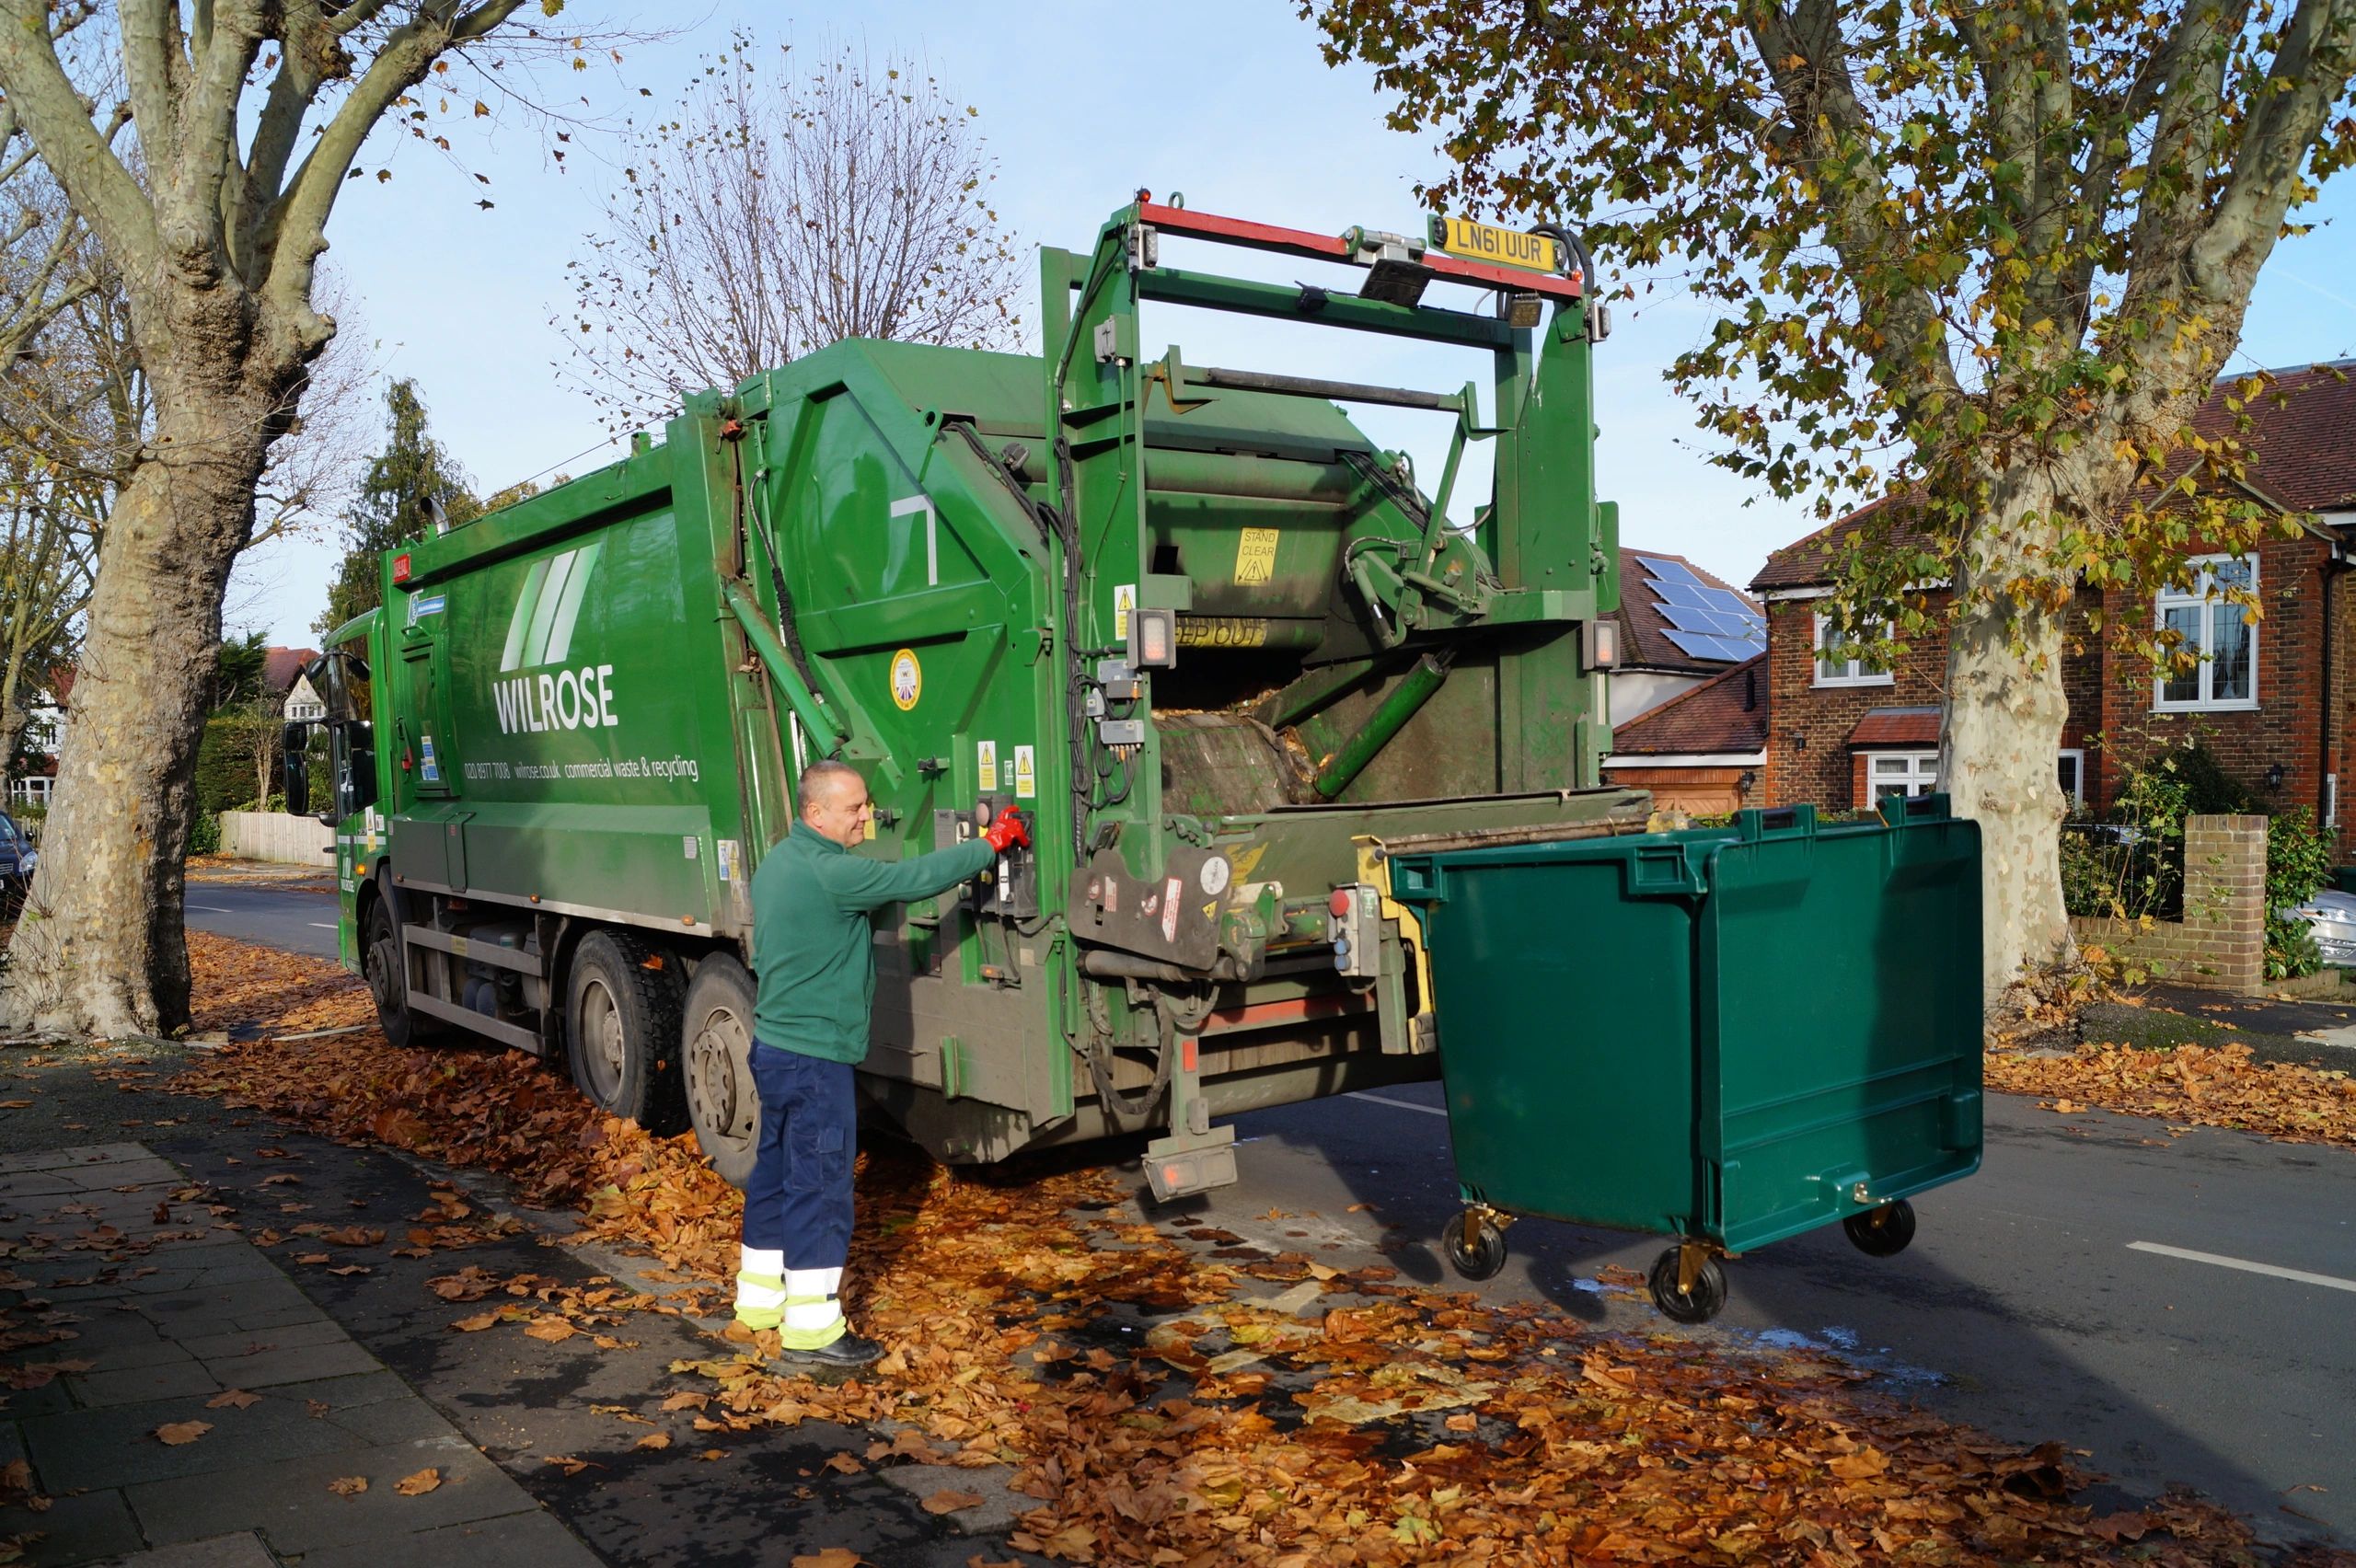 Dustcart ready for commercial waste service collection. Man standing next to vehicle.